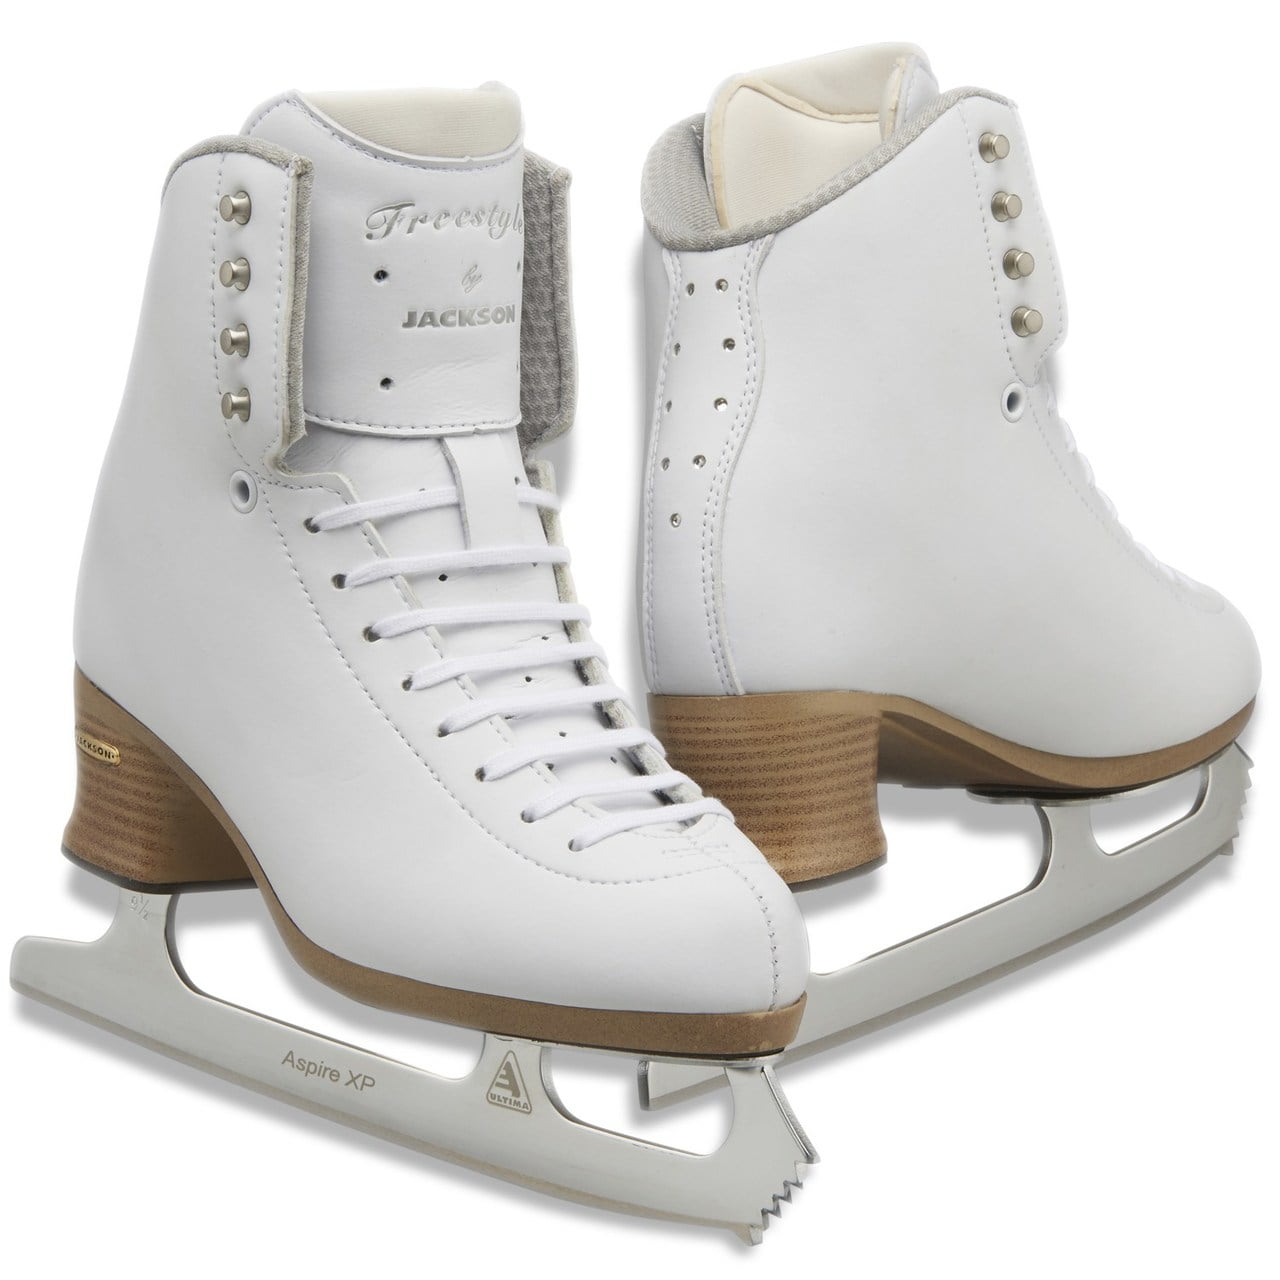 Details about   Size 9 Women's Tricot-Lined Ice Skates 